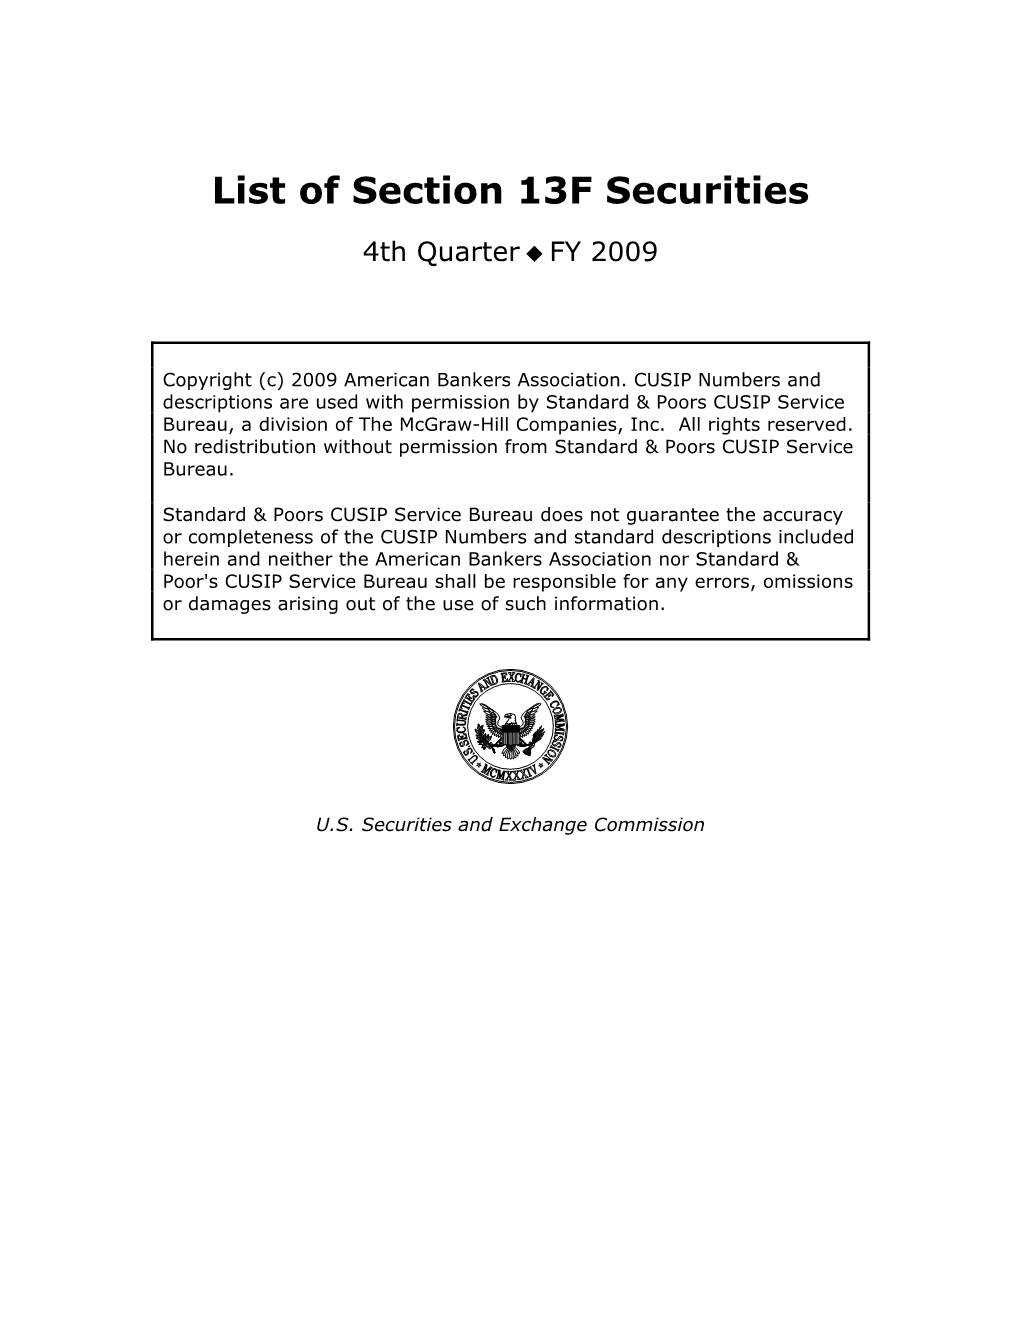 List of Section 13F Securities, Fourth Quarter 2009